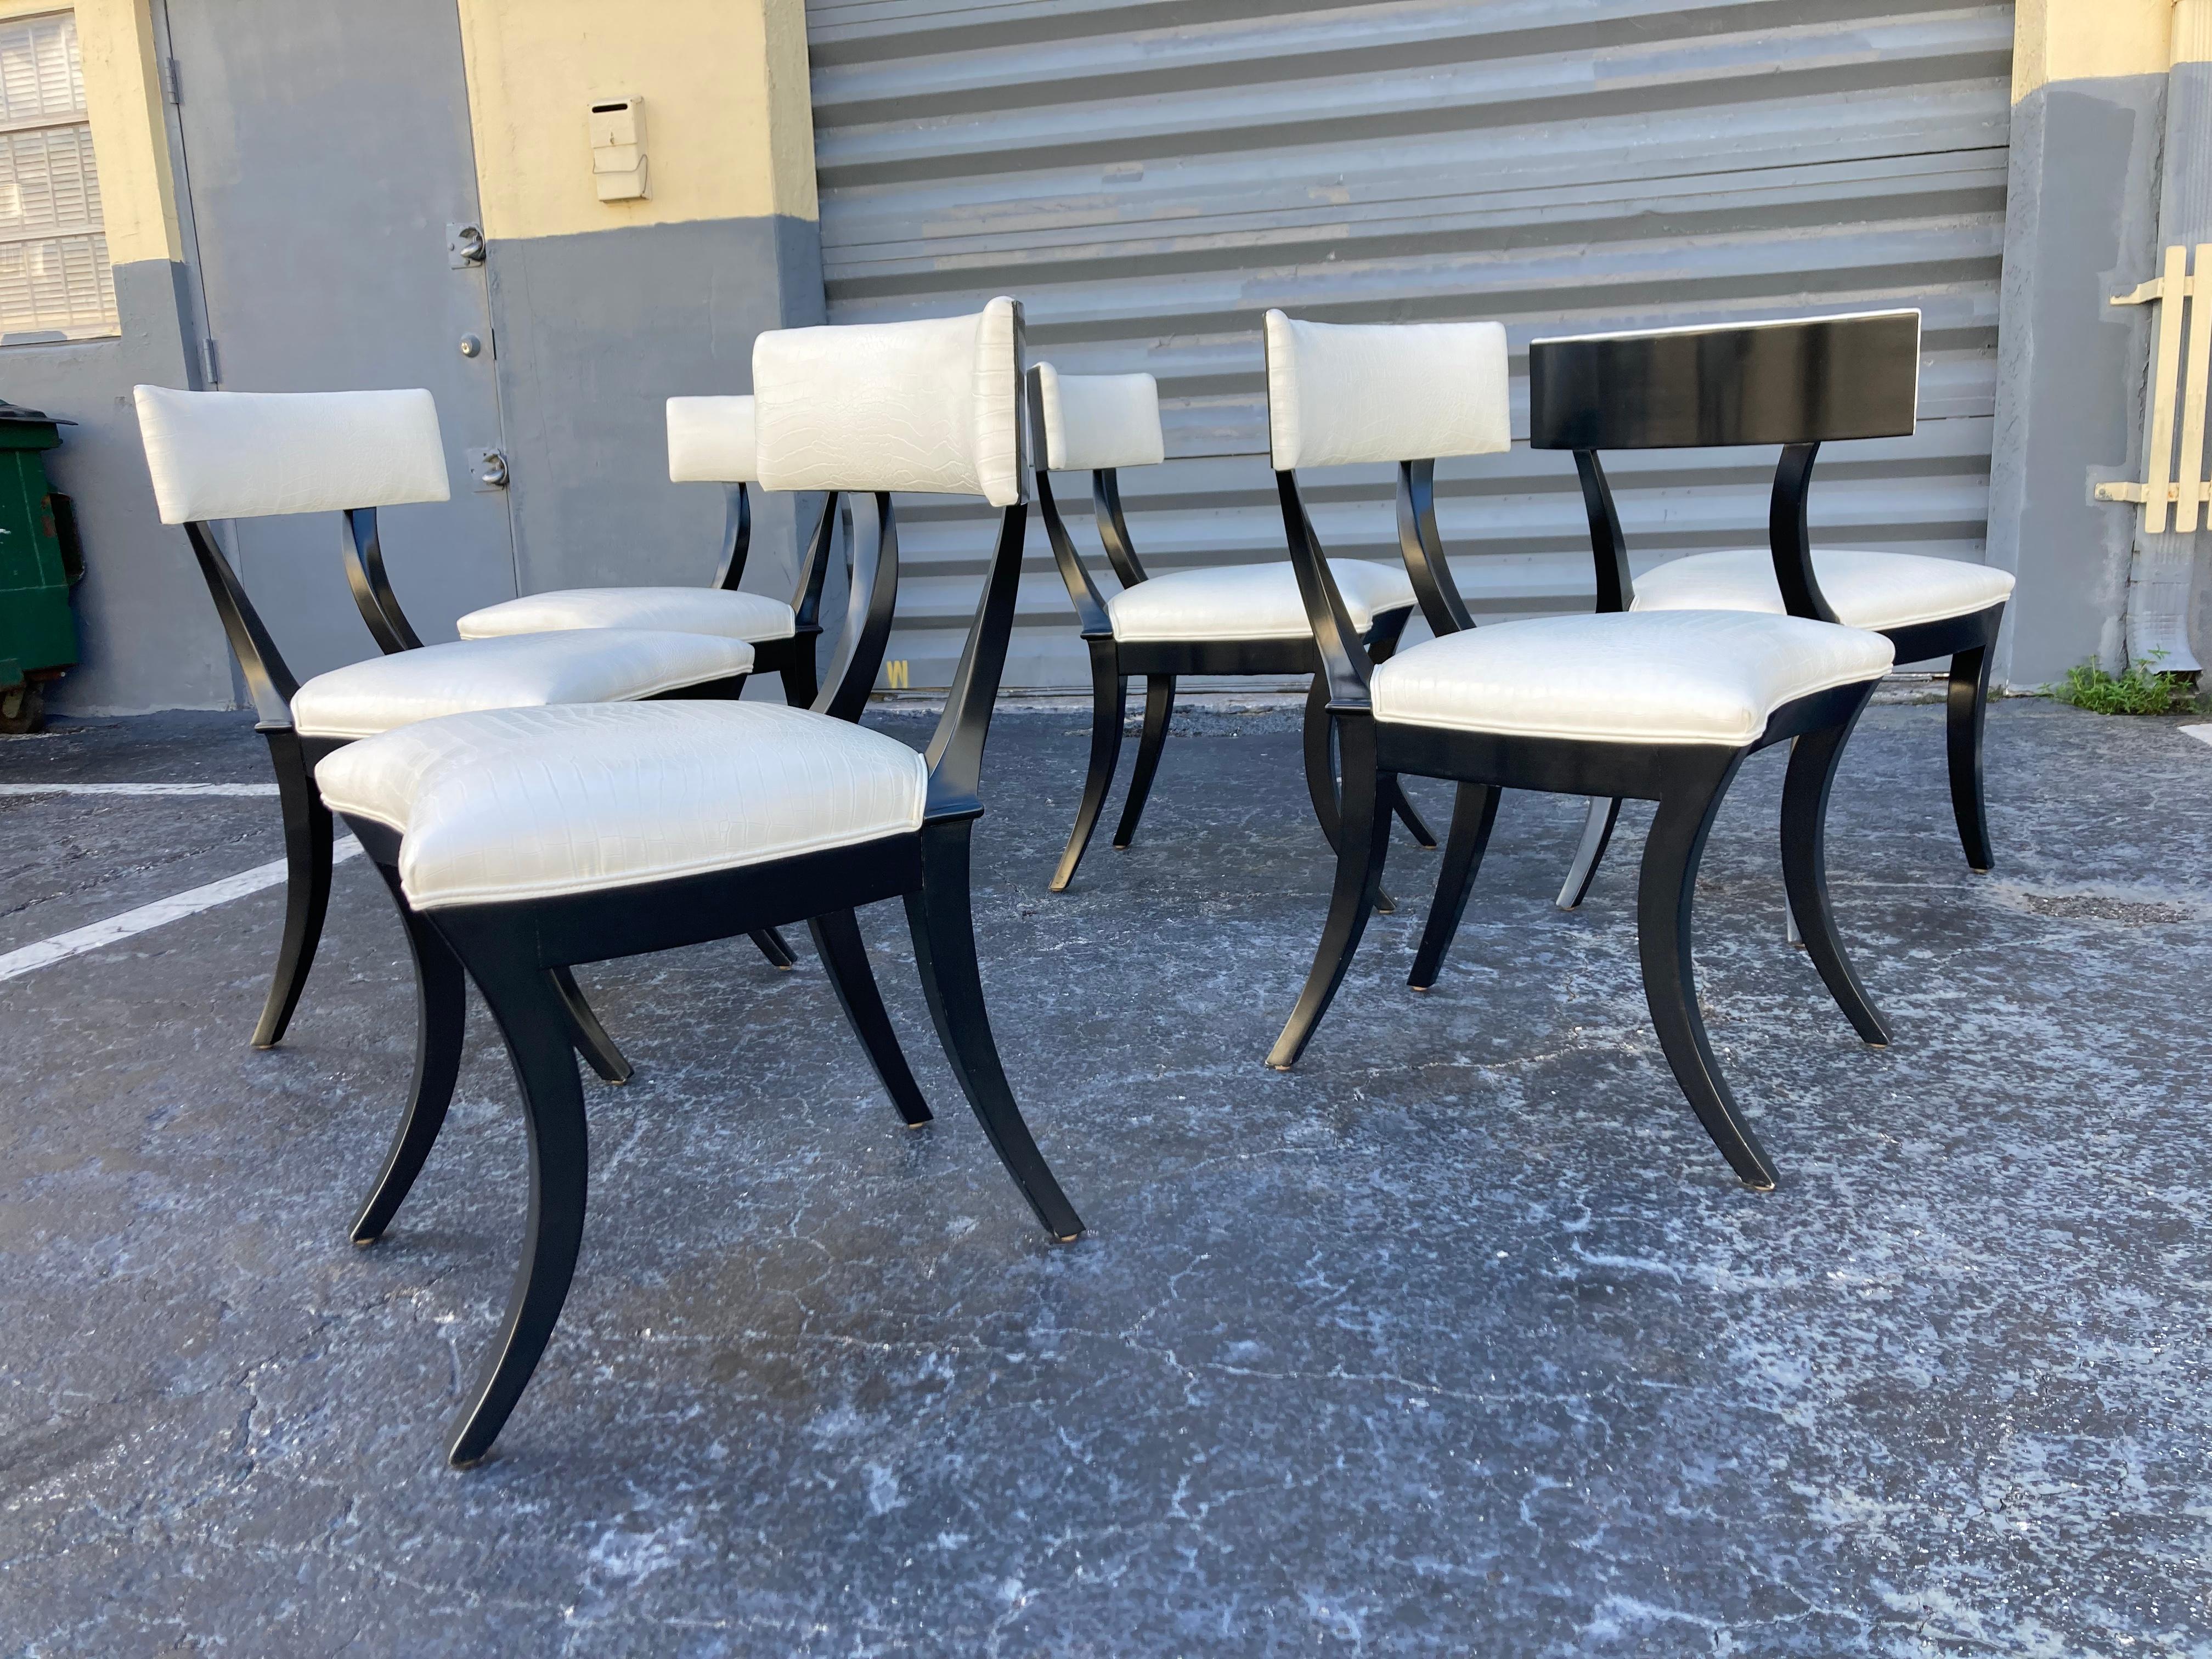 Exceptional set of six Olympia Klismos dining chairs made by Artistic Frame NY. Ebonized wood with white embossed crocodile leather seats and backs. 
Exceptional quality and great design.
The set is not new and it does have some normal age related